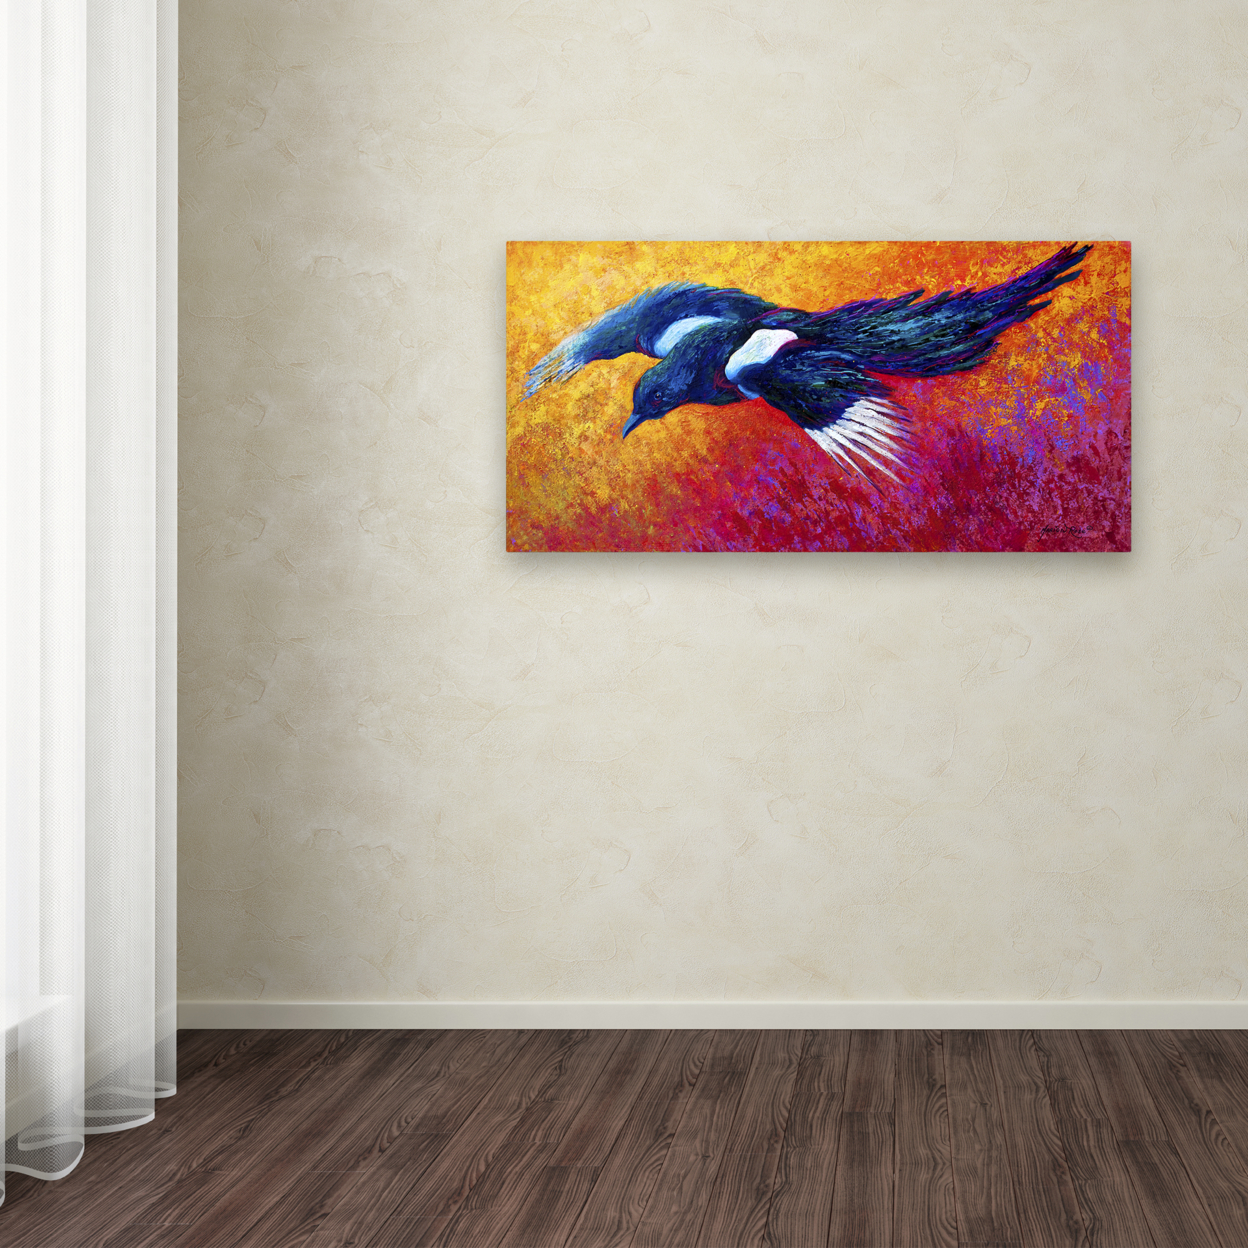 Marion Rose 'Pie In Flight' Ready To Hang Canvas Art 16 X 32 Inches Made In USA